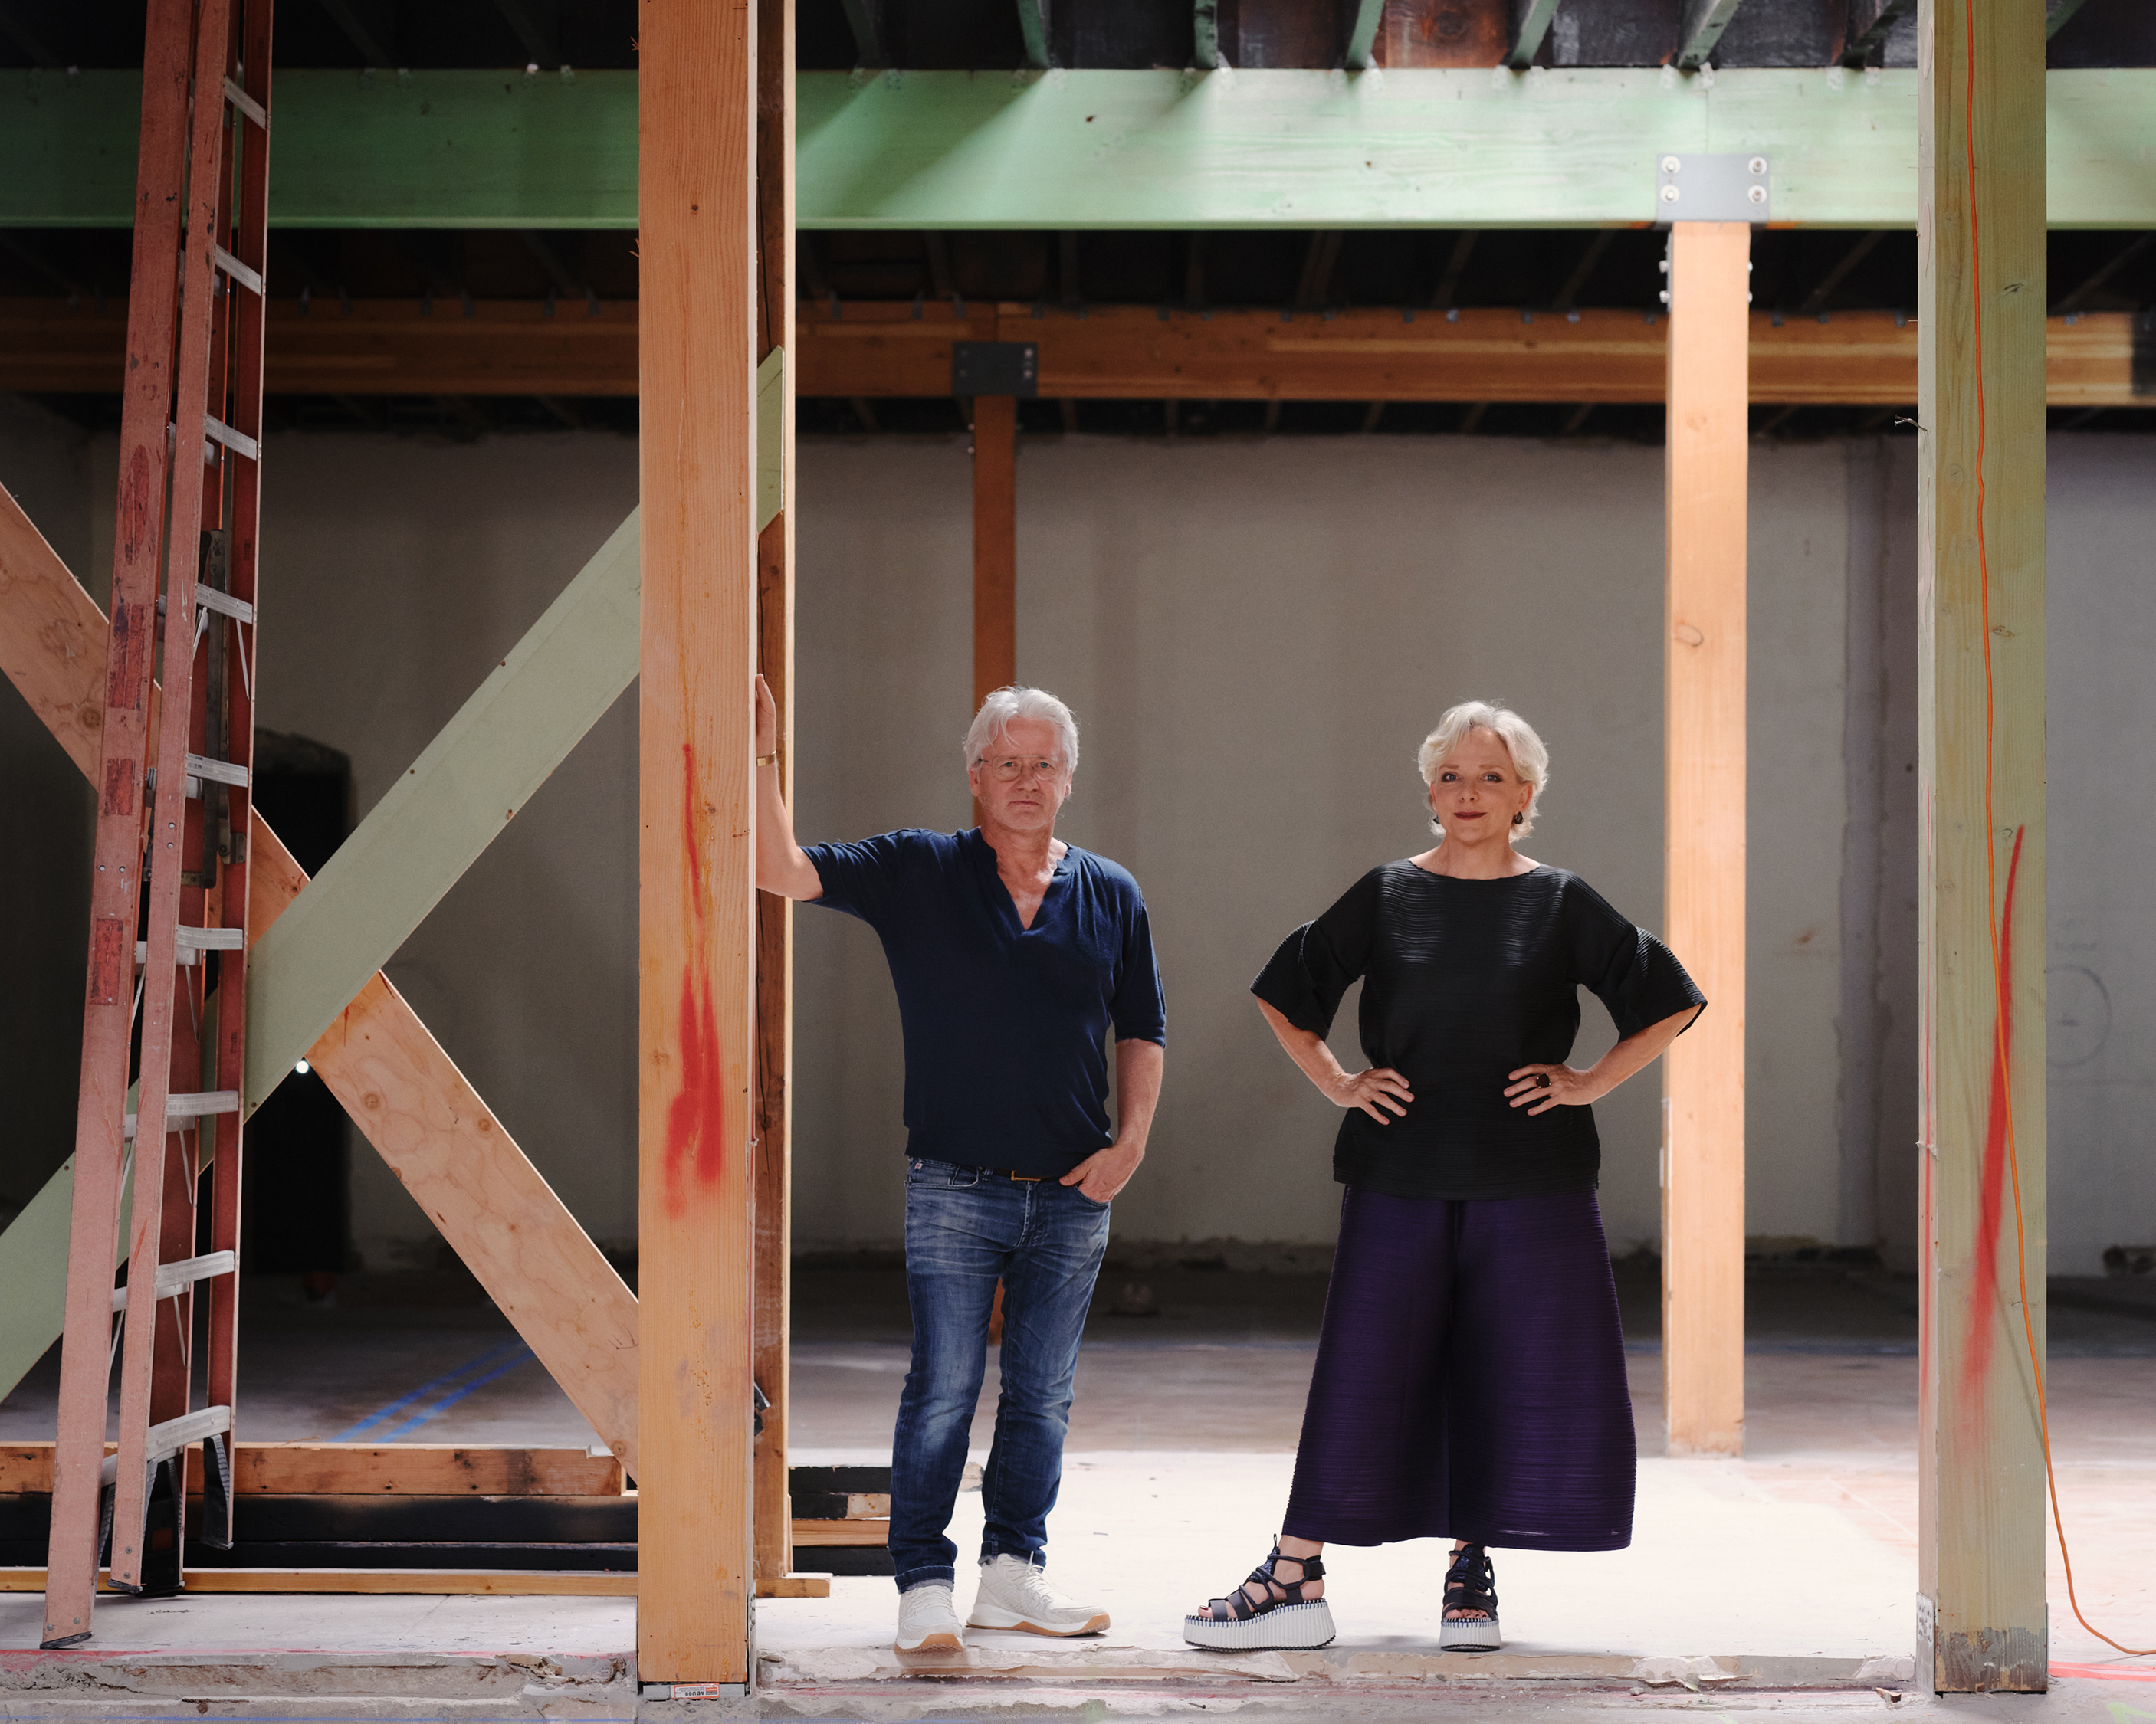 Two people (Trevyn and Julian McGowan) stand in the center of a large room with tall ceilings and large vertical beams.